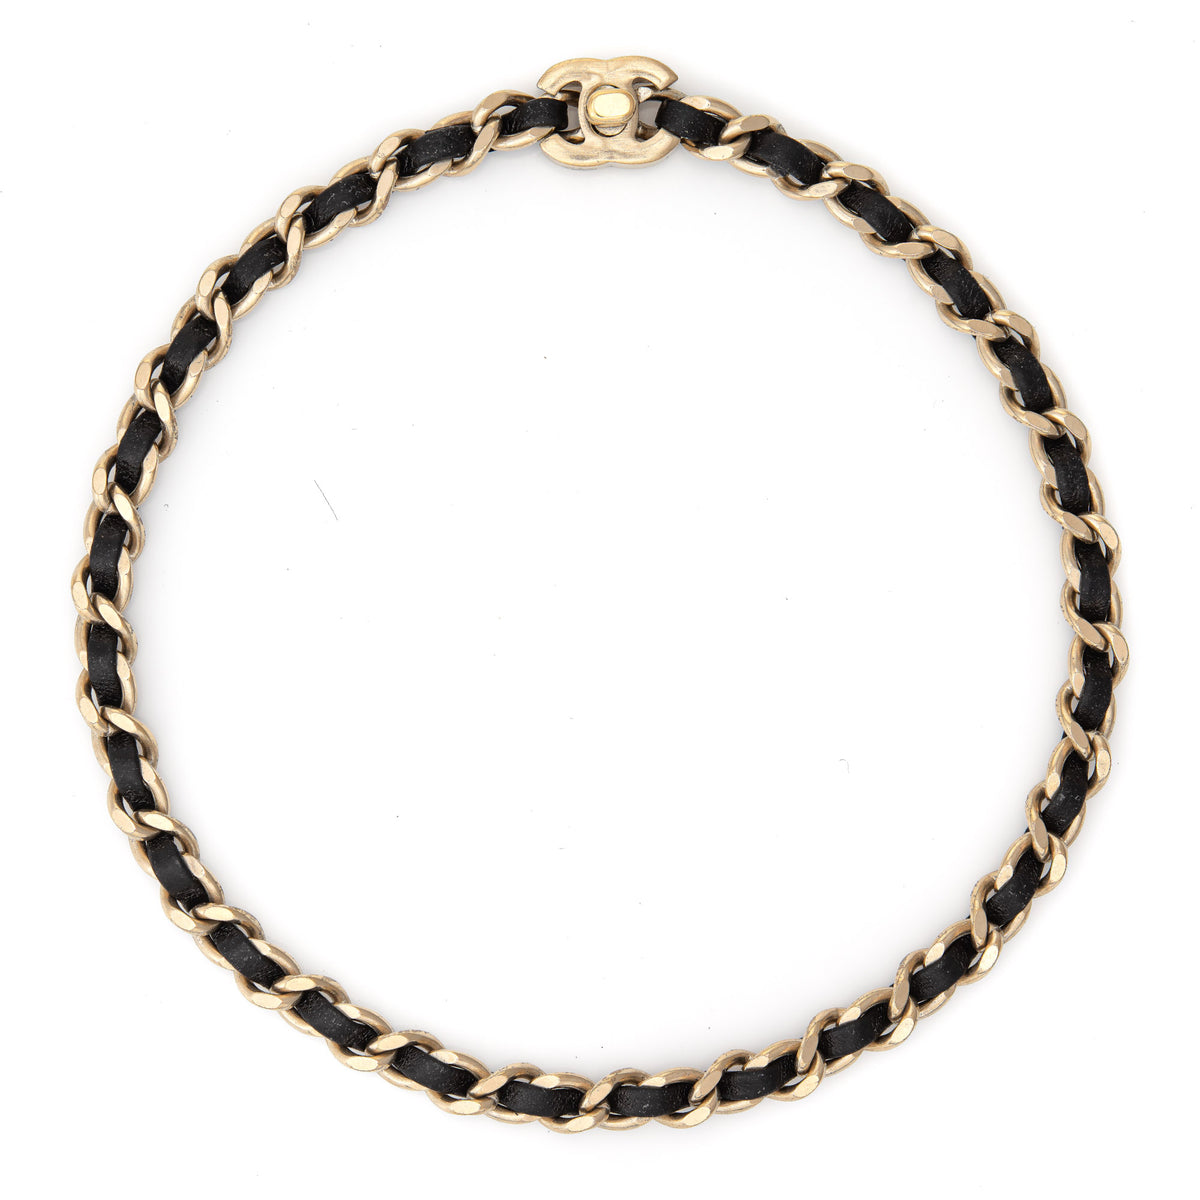 Chanel Gold Metal and Black Lambskin Woven Chain Choker Necklace, 1984-1992, Fashion | Choker, Vintage Jewelry (Very Good)